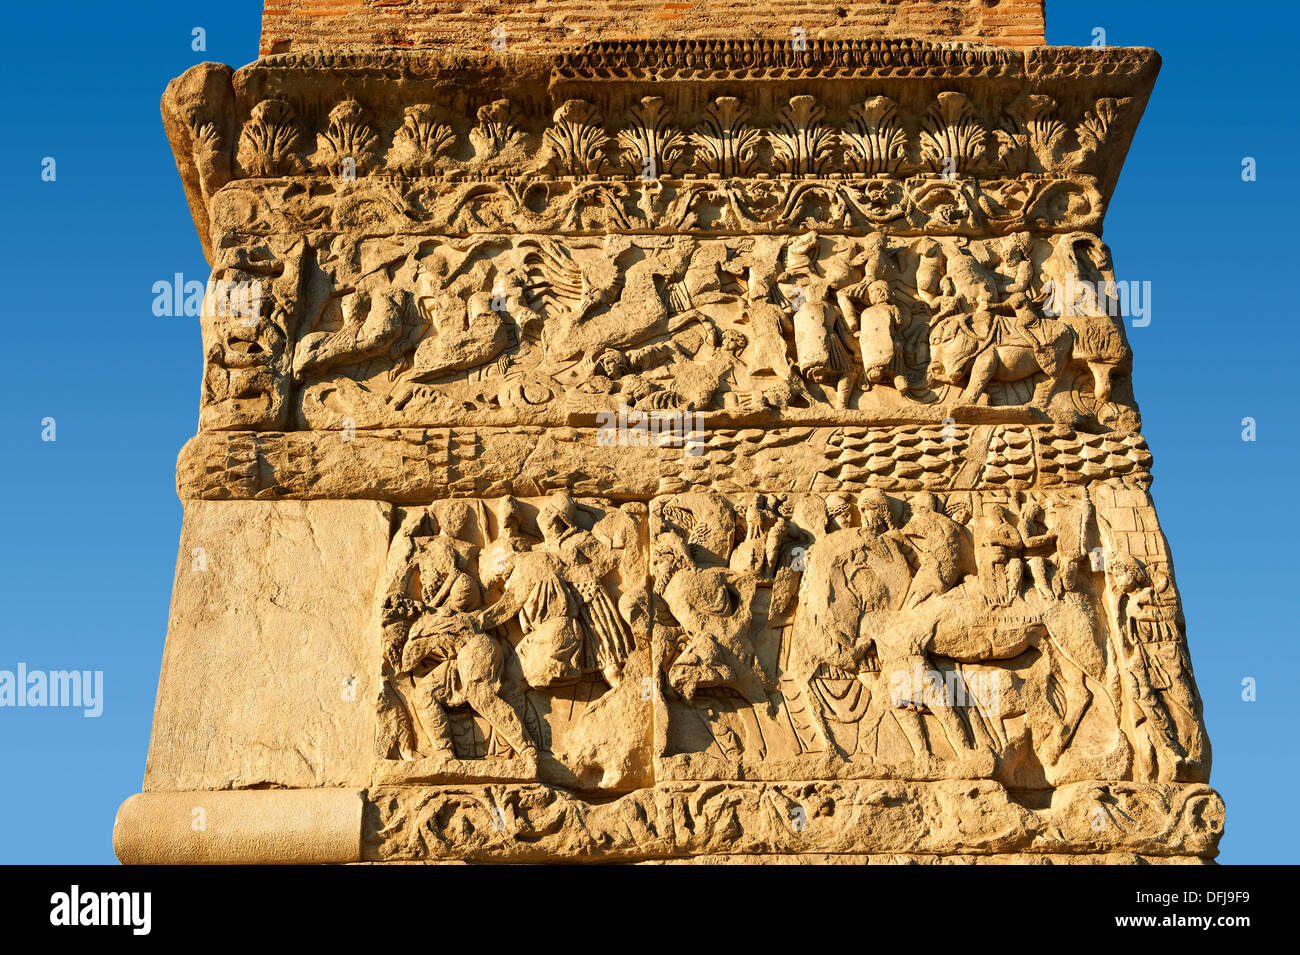 The 4th-century Arch of Roman Tetrach Emperor Galerius, clebrating his victory of the Sassanid Persians. Thessalonica, Greece. Stock Photo